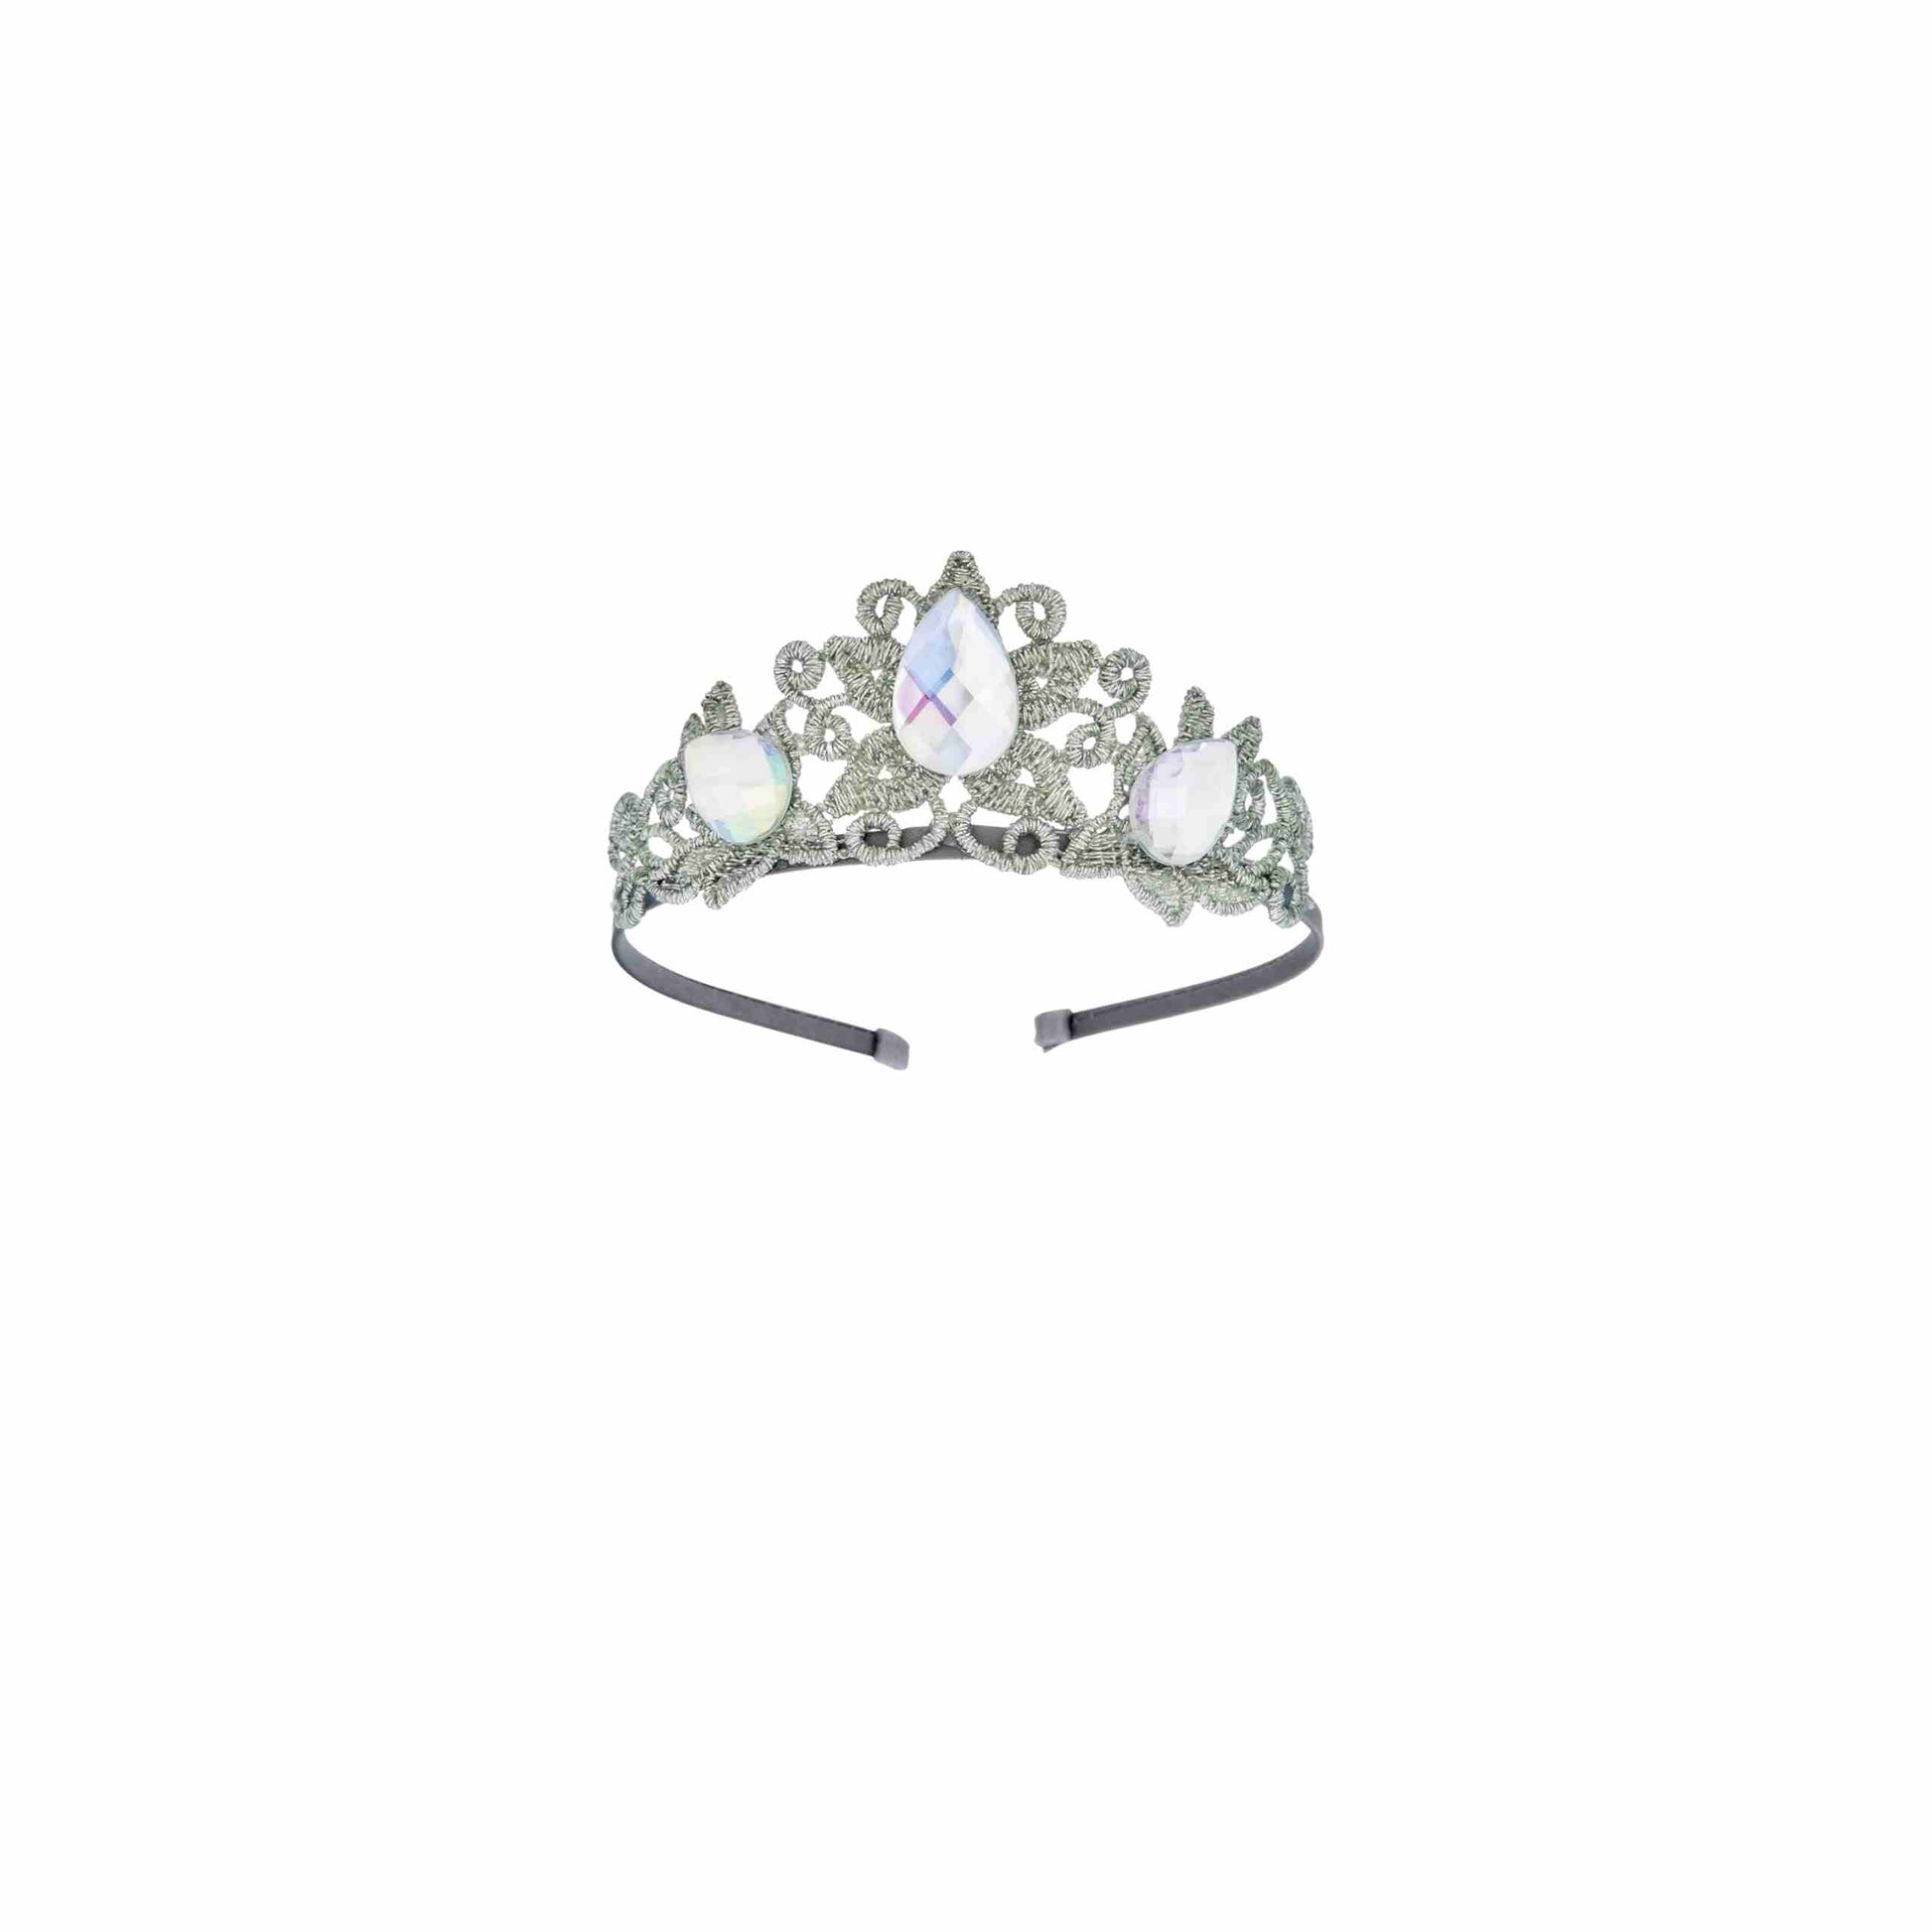 a tiara with opal stones on it